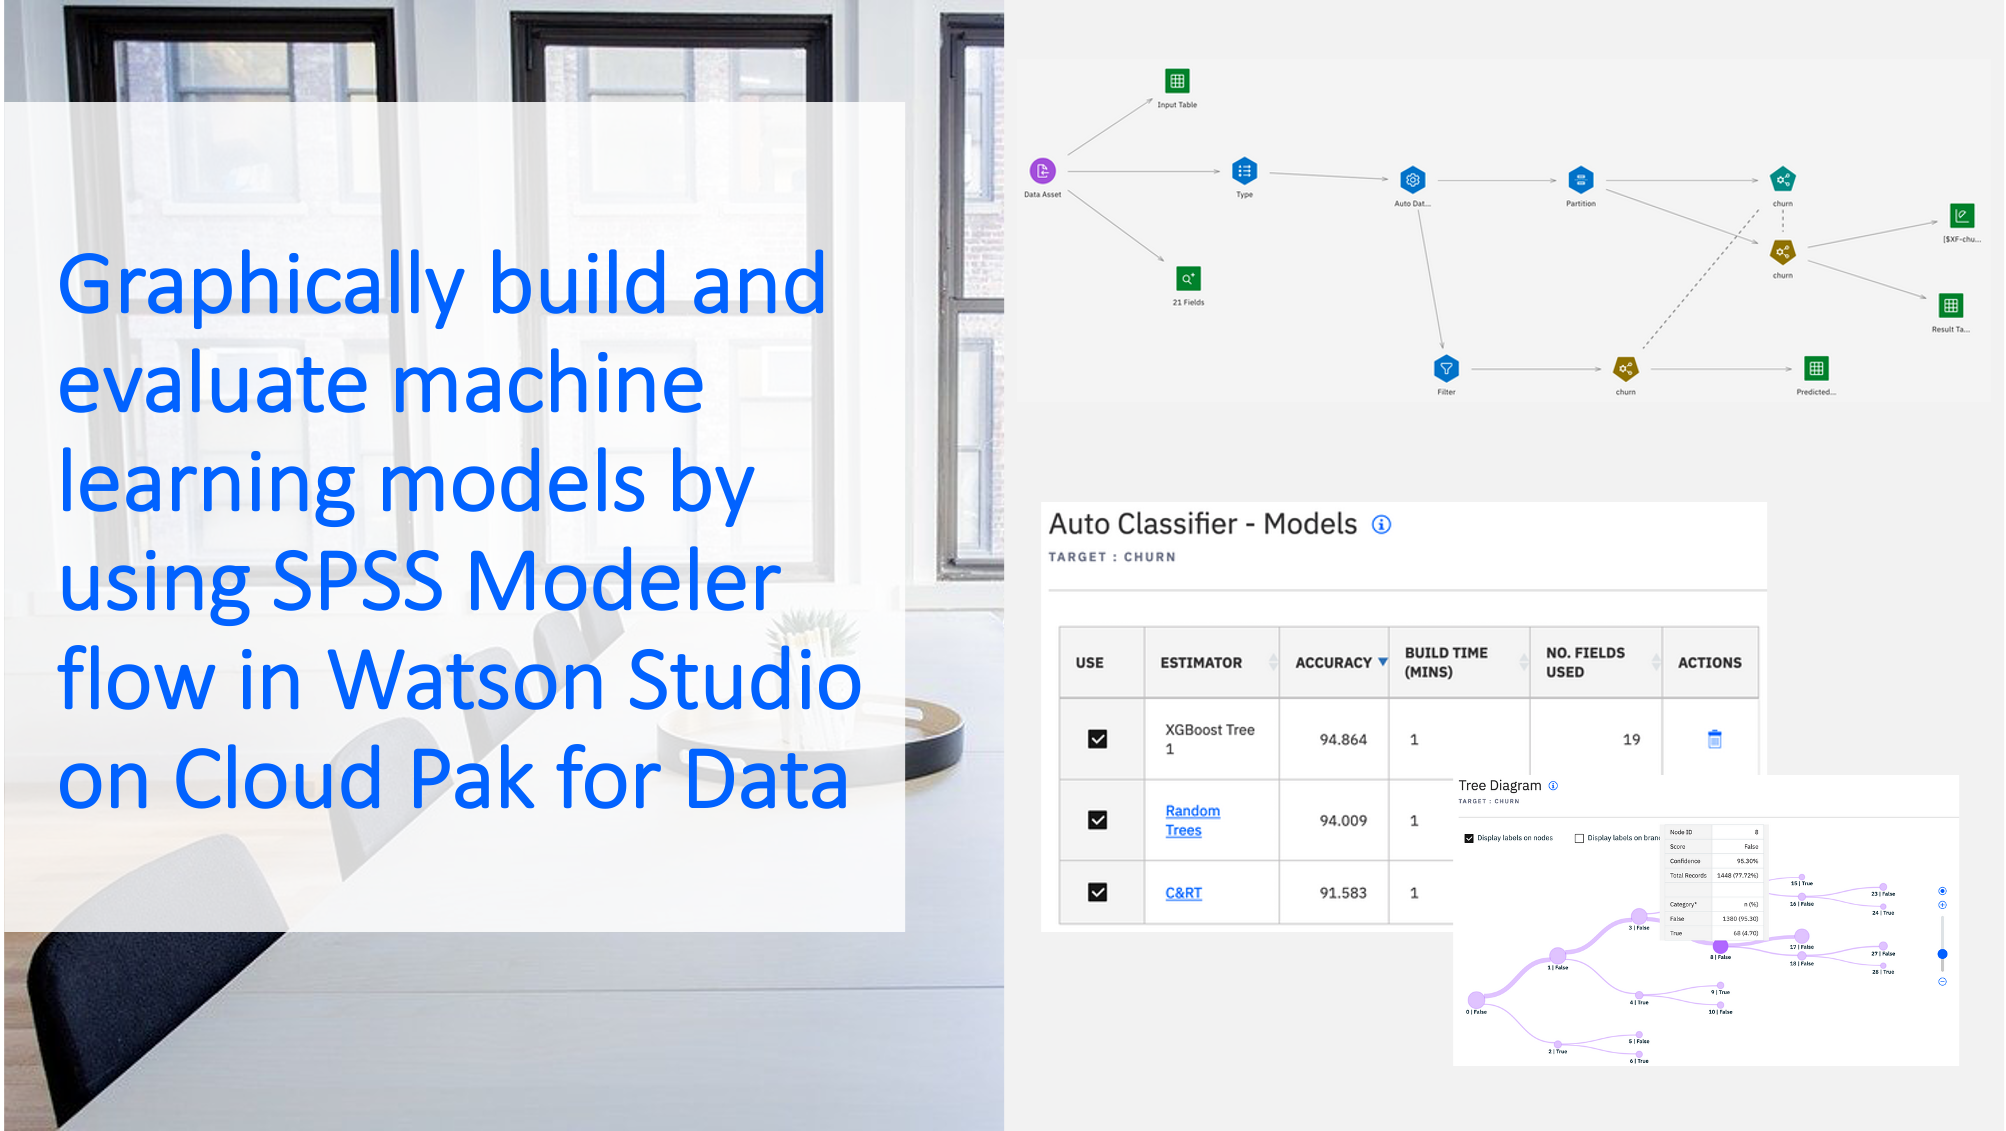 Graphically-build-and-evaluate-machine-learning-models-by-using-SPSS-Modeler-flow-in-Watson-Studio-on-Cloud-Pak-for-Data